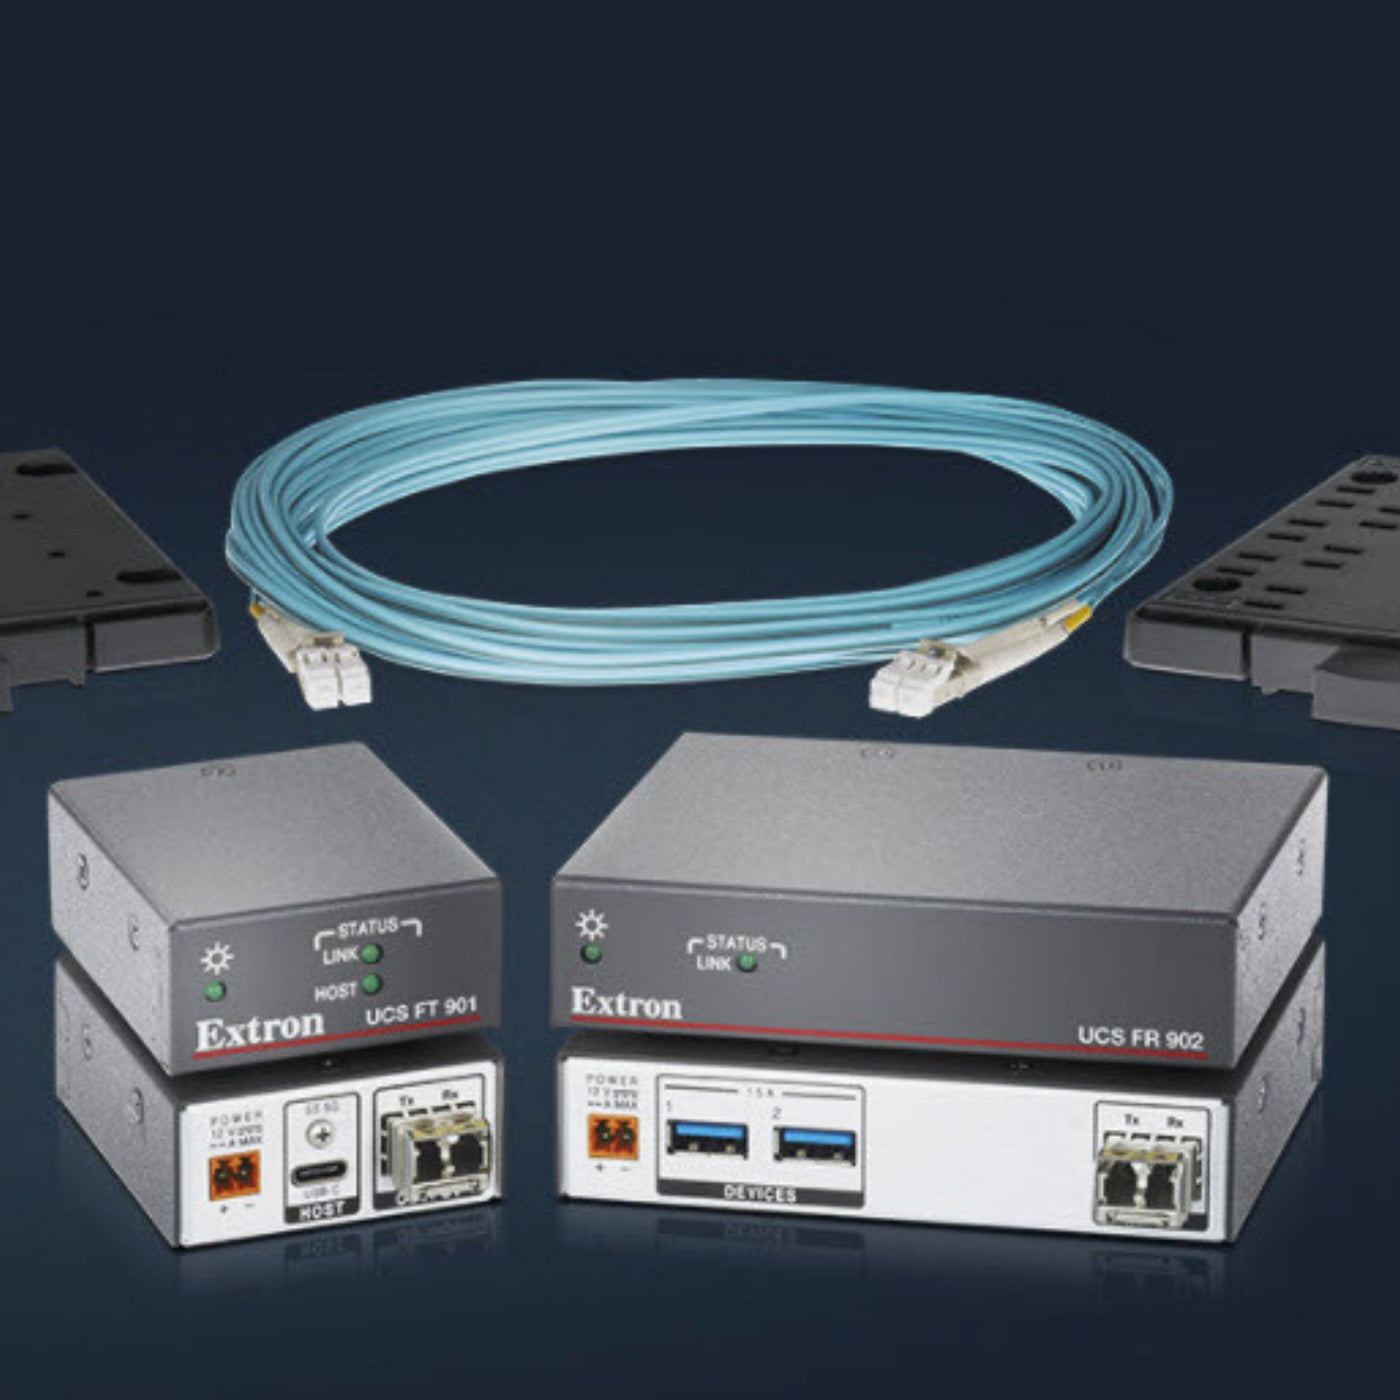 Extend SuperSpeed USB Devices with the Latest Extron Extenders